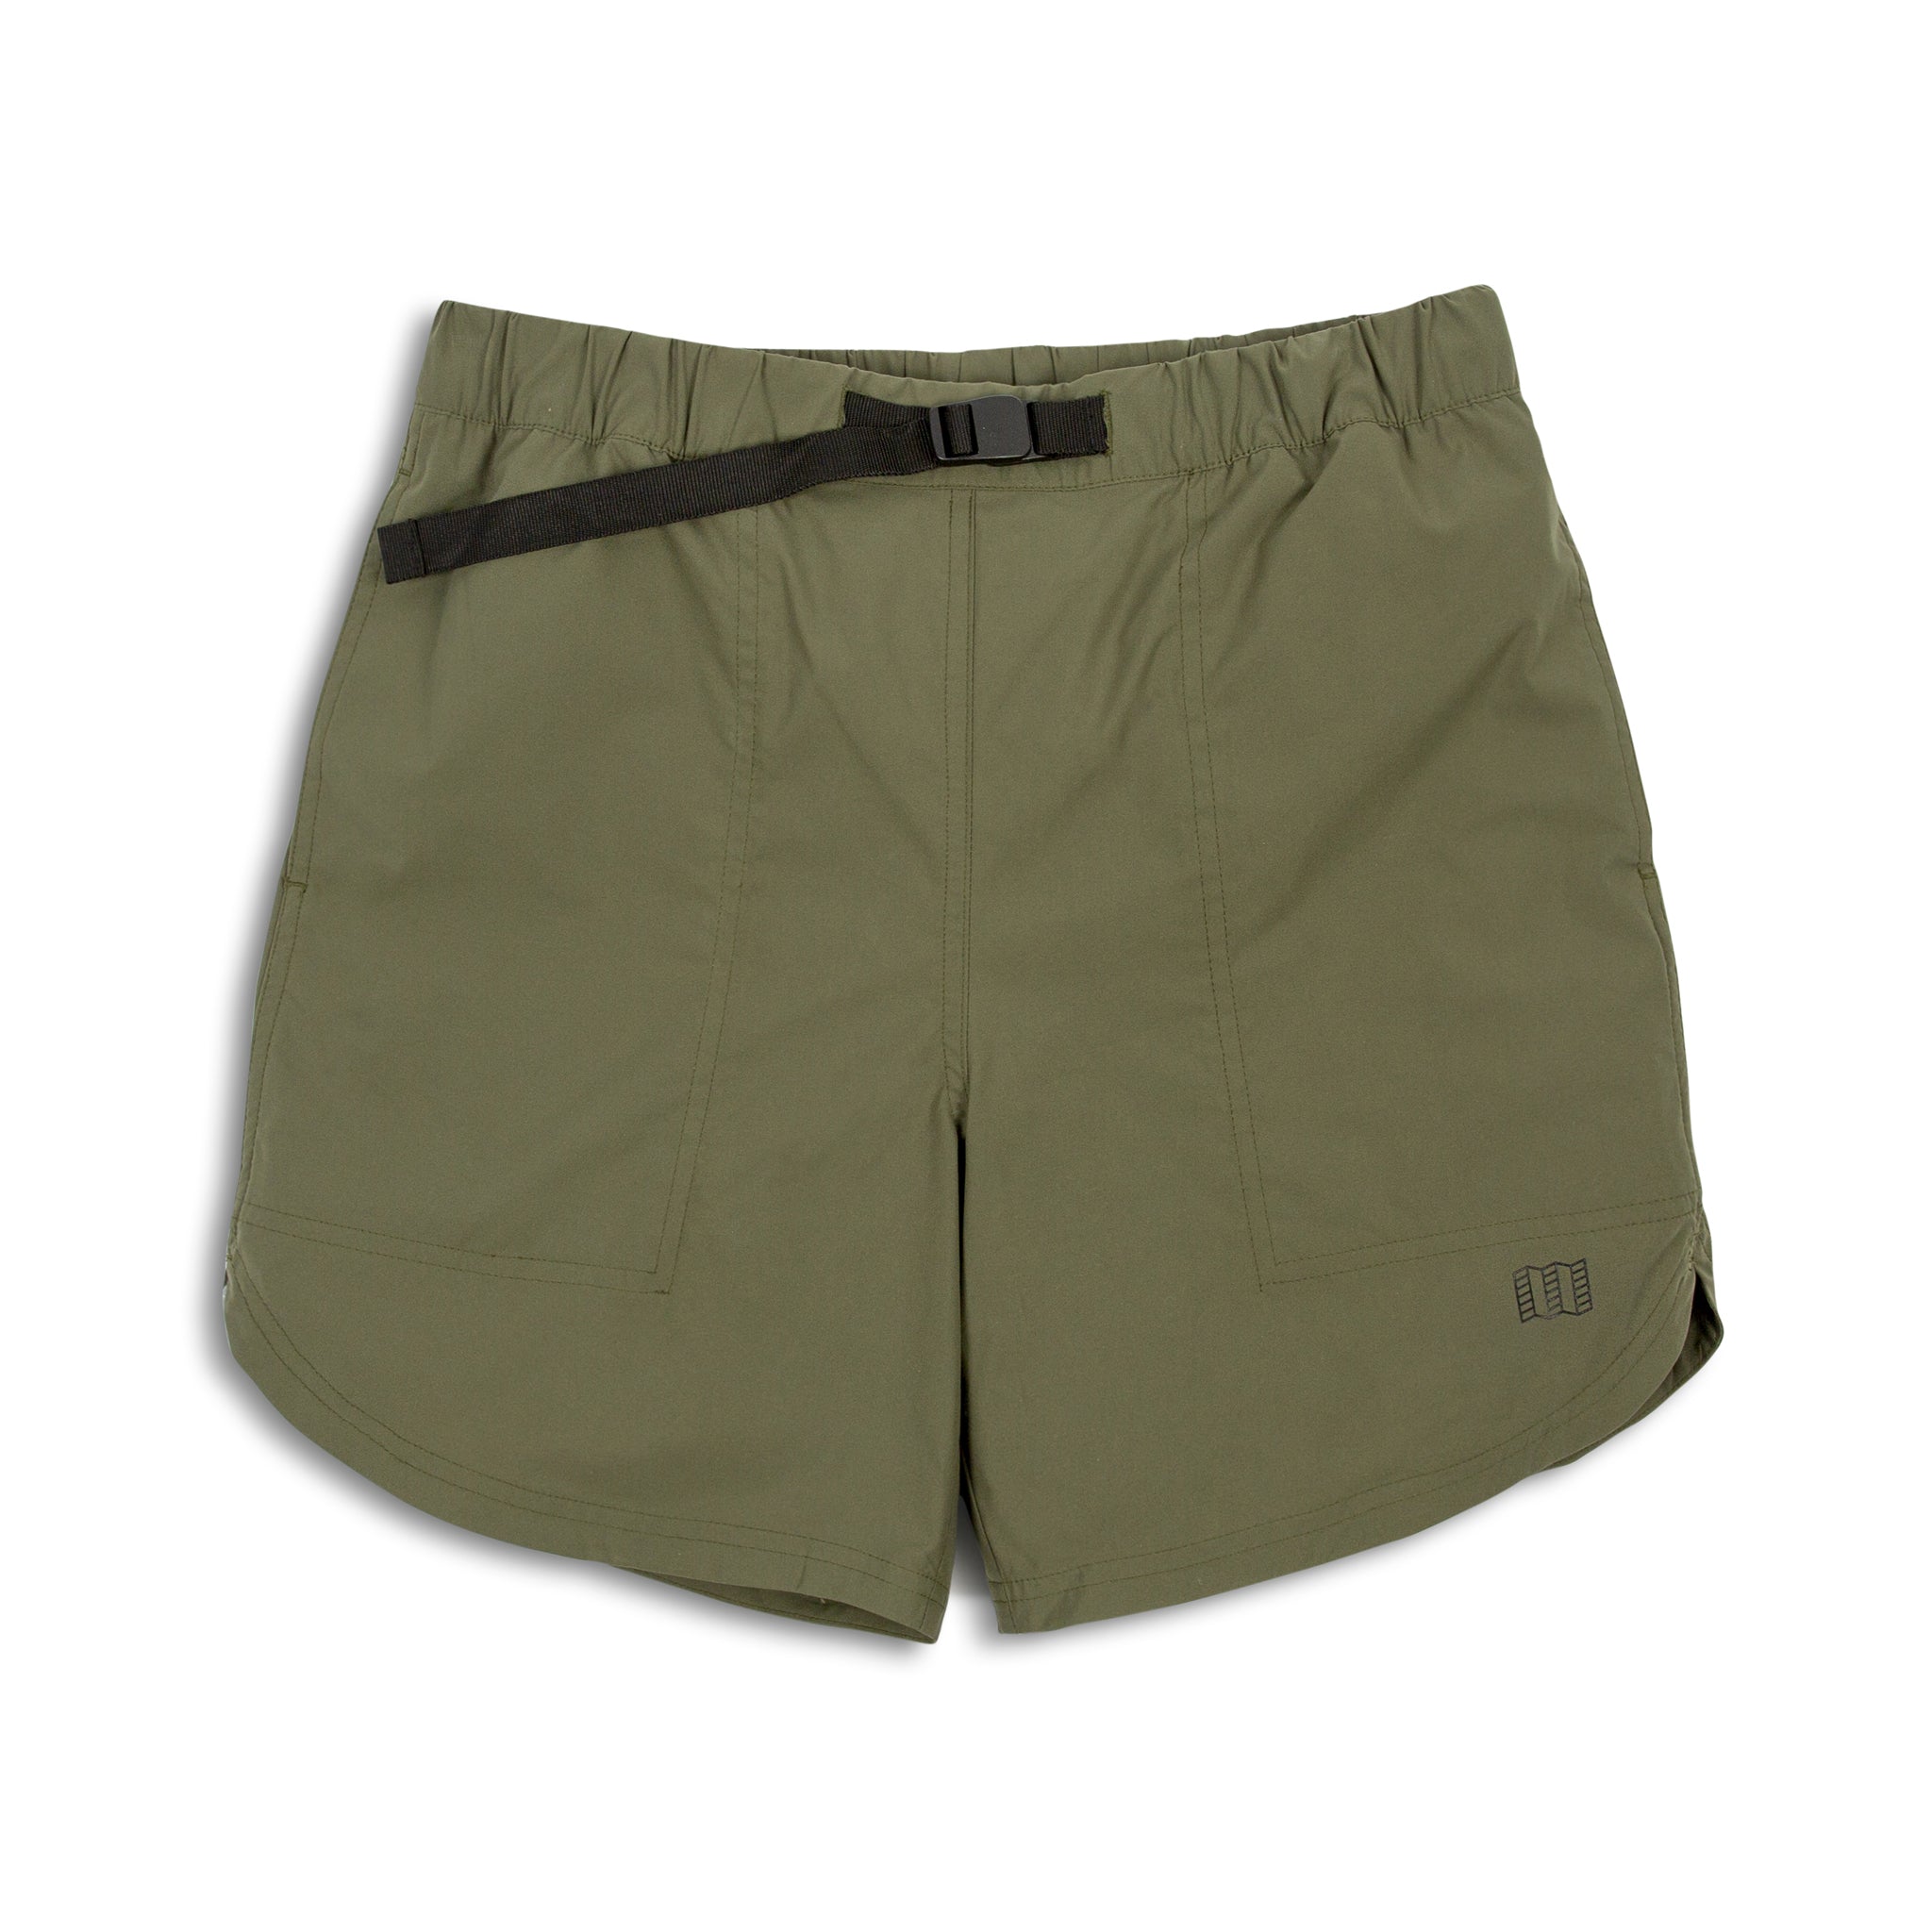 River Shorts Lightweight by Topo Designs – The Bag Creature